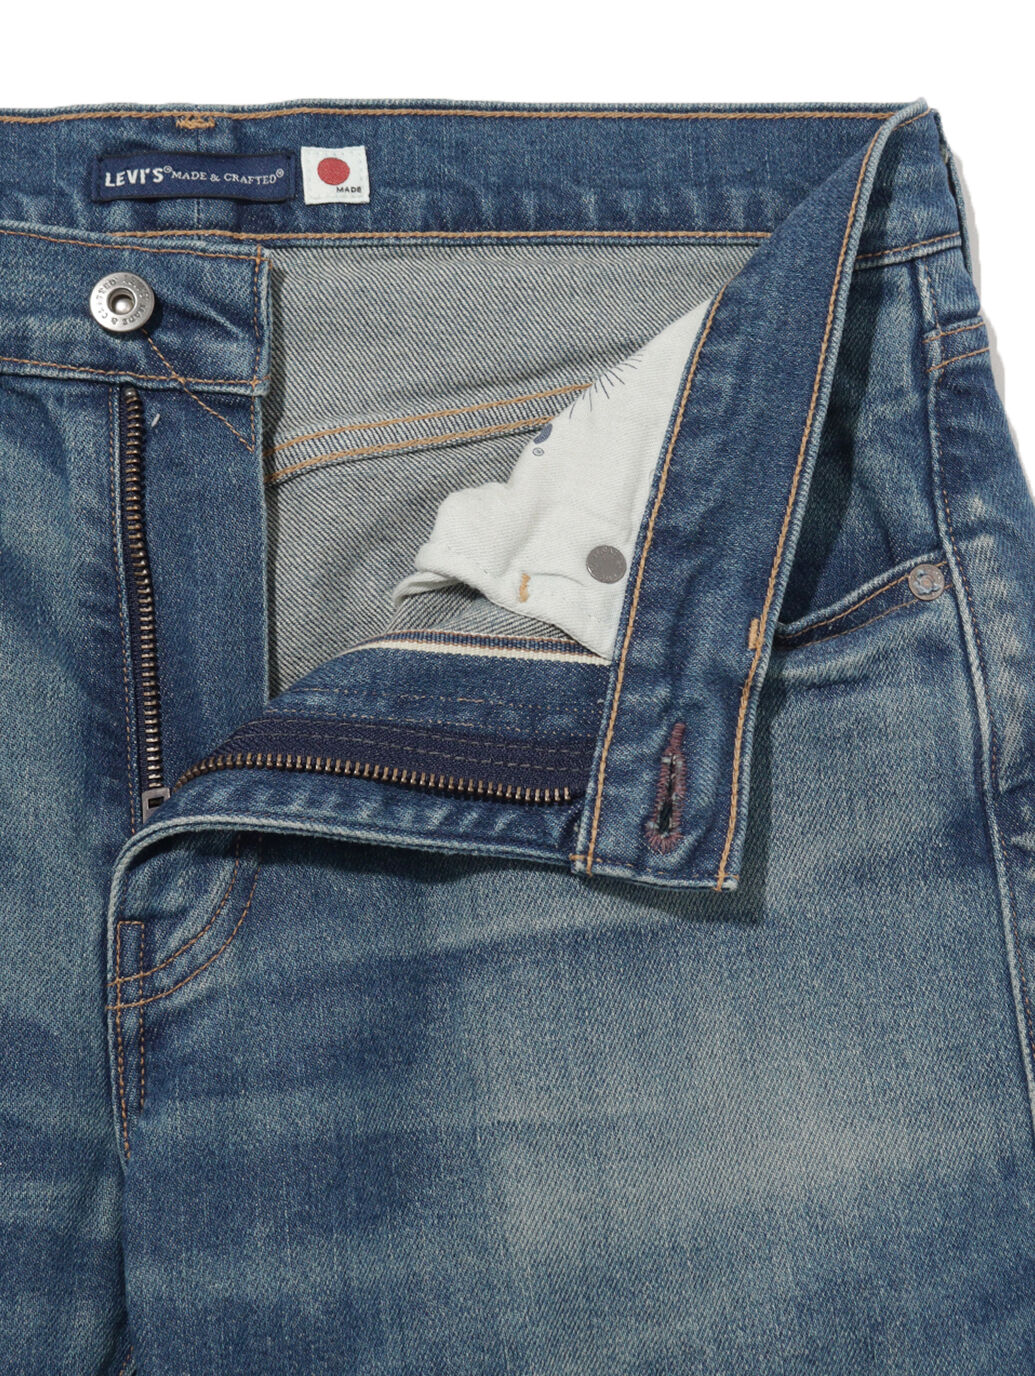 LEVI'S®MADE&CRAFTED™502™ SAFU MADE IN JAPAN｜リーバイス® 公式通販